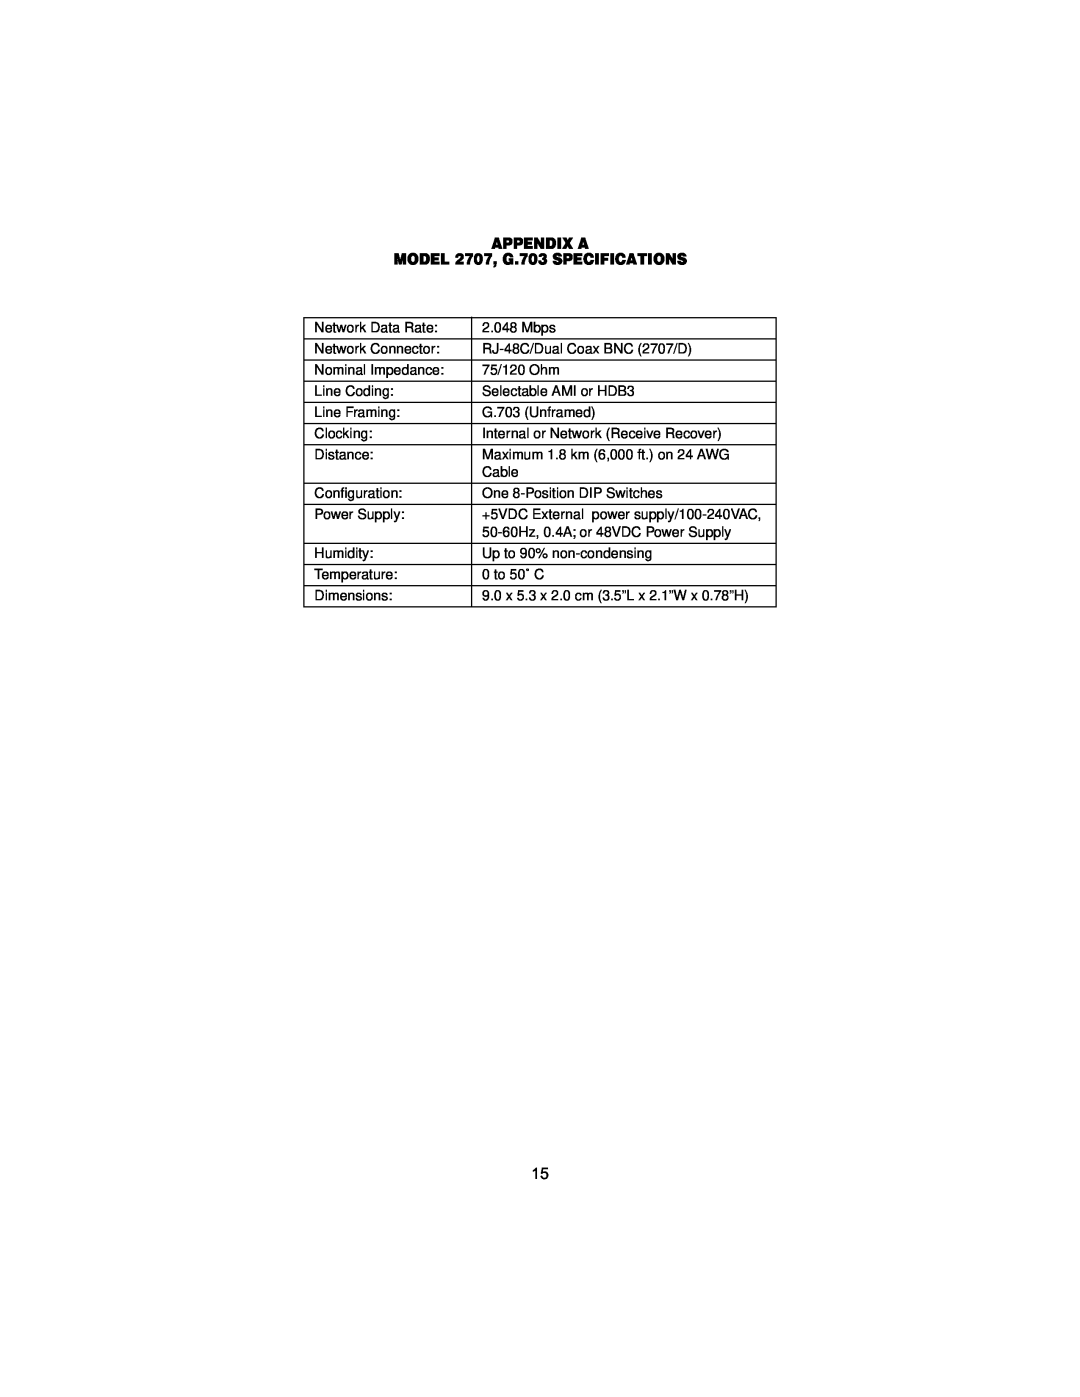 Patton electronic X.21 Interfaces, 2707C, 2707D user manual APPENDIX A MODEL 2707, G.703 SPECIFICATIONS 